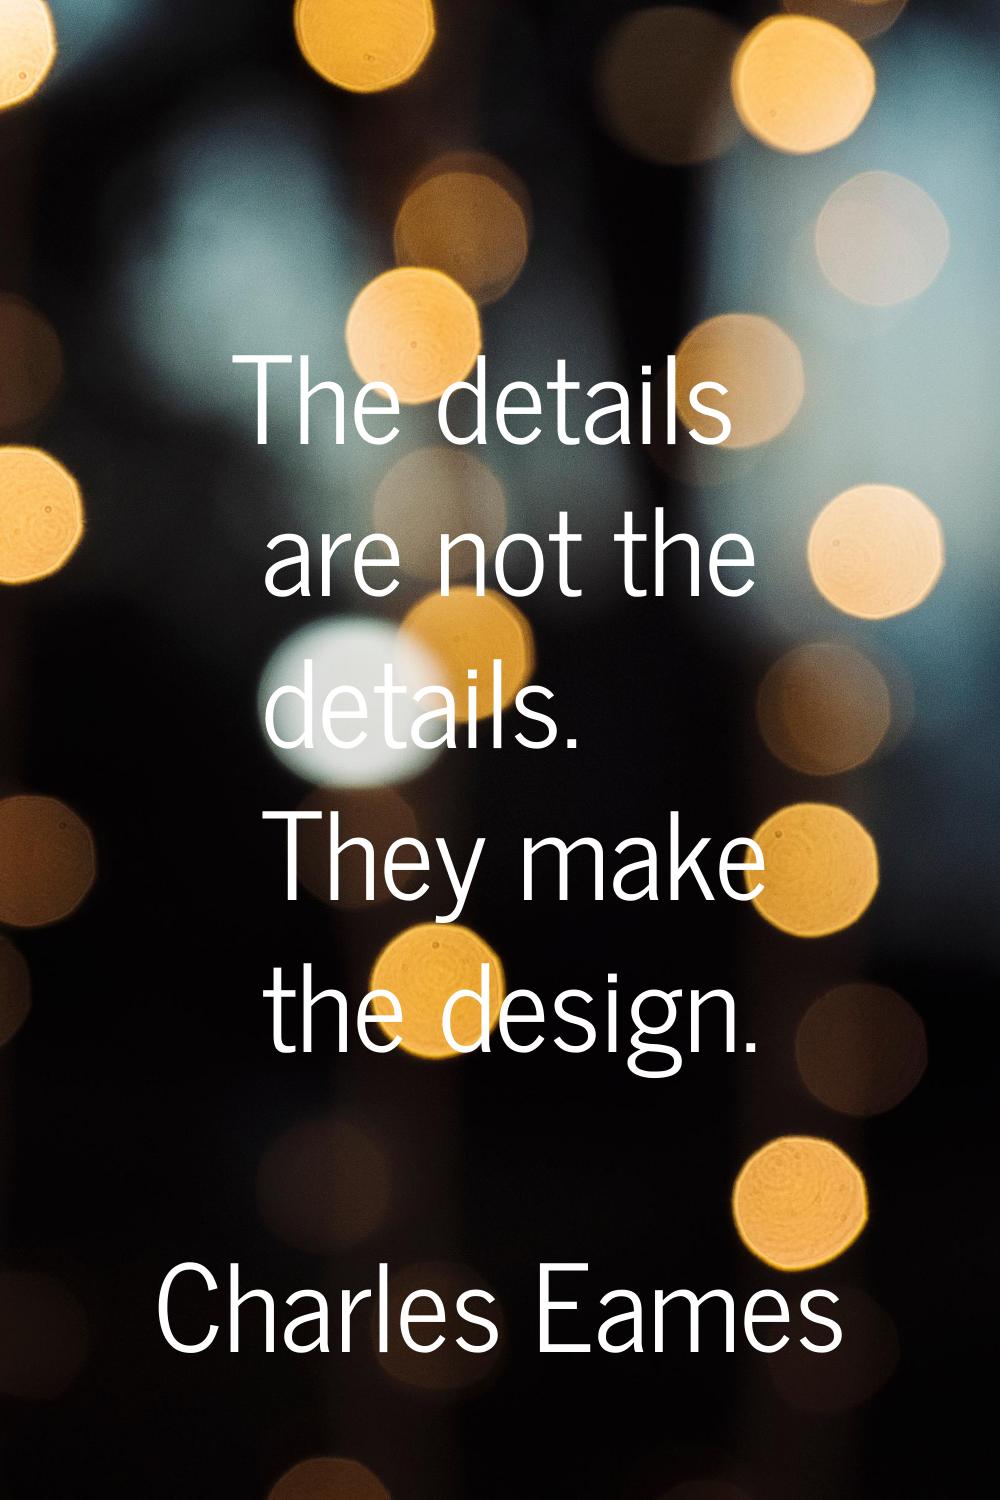 The details are not the details. They make the design.